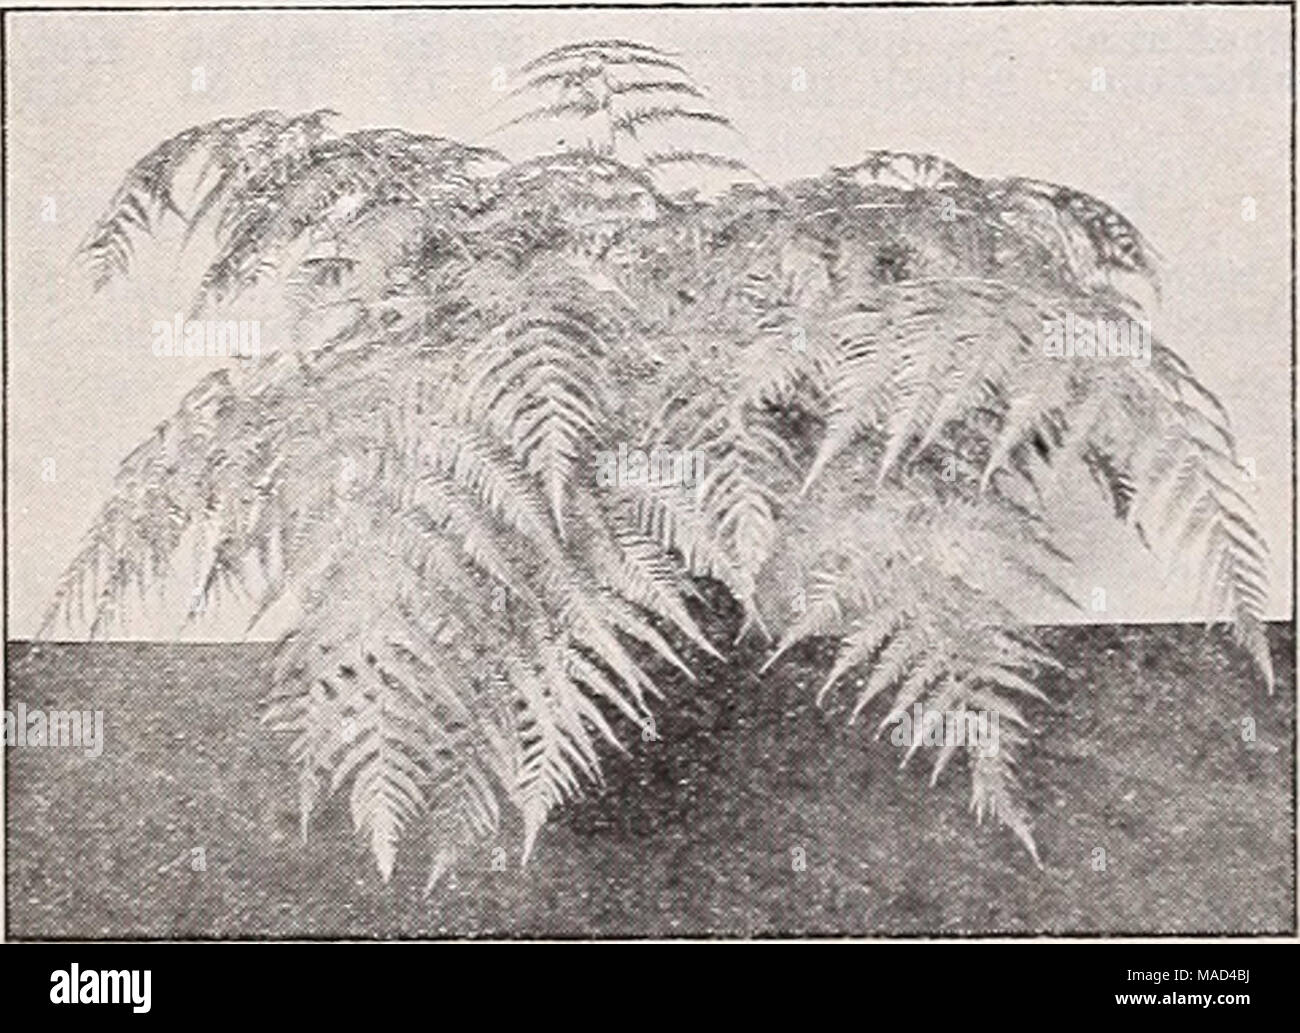 . Dreer's wholesale catalog for florists and market gardeners : autumn 1941 edition . Cibotium Schledel Cibotium Schiedei—Mexican Tree Fern One of the most desirable and most valuable Ferns for room decoration. Grows to considerable size and Is most attractive with its lovely large fronds of a beau- tiful light green color. A beautiful lot of strong specimen plants. Each Splendid plants in 9-inch tubs $6 50 Special prices on quantity lots. Cyrtomium Rochfordianum compactiun The Improved Holly Fern Next to the Boston Ferns this Holly Fern is the most satisfactory for home and apartment use beca Stock Photo